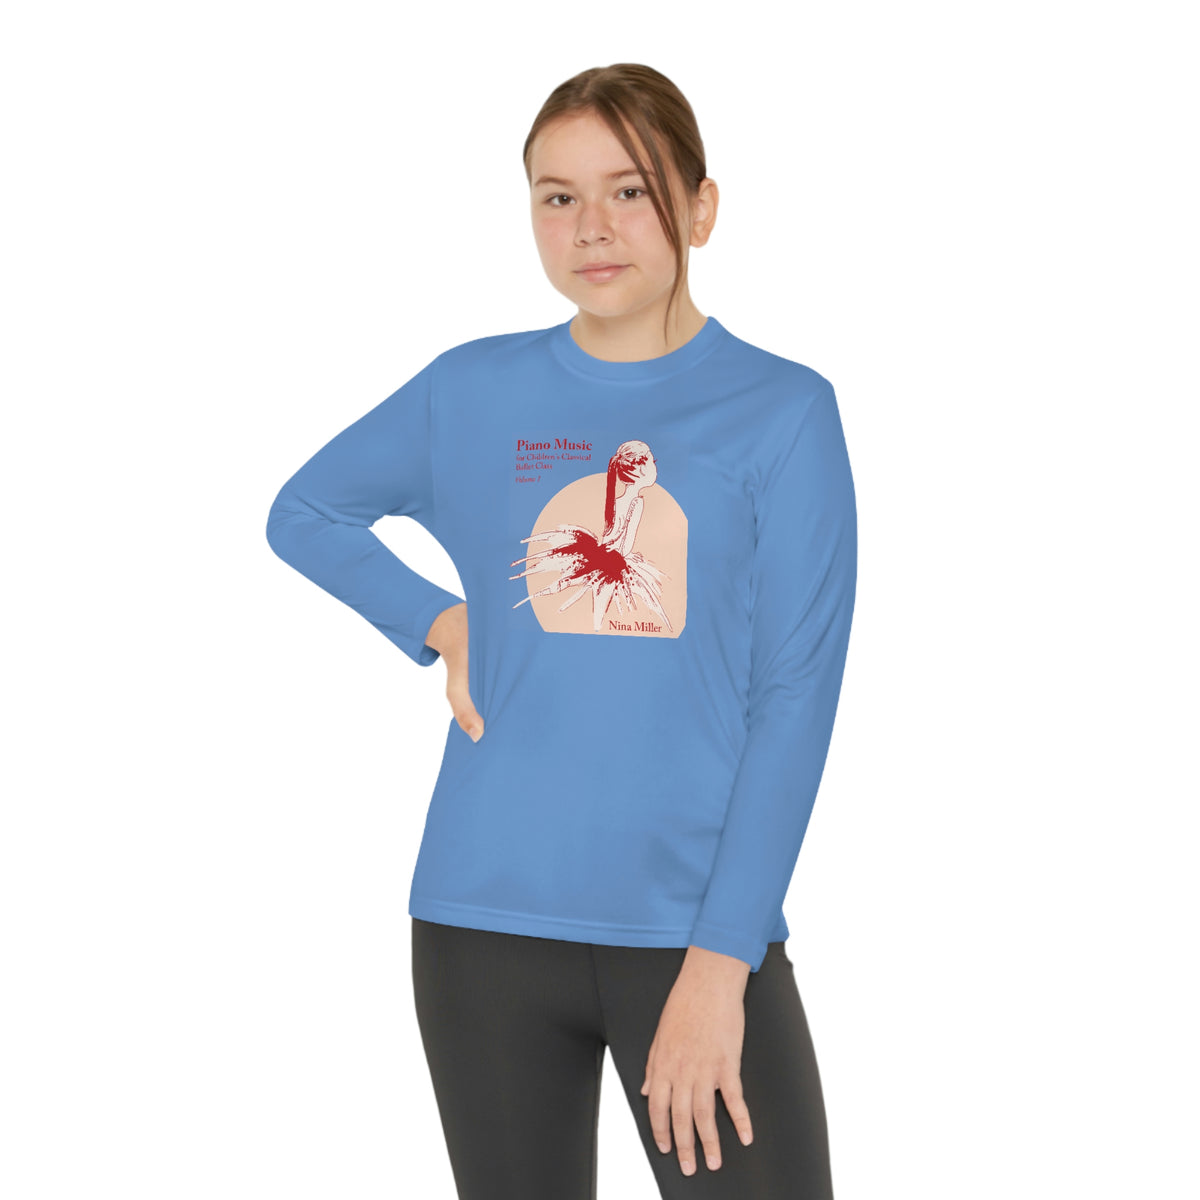 Children's Ballet Class, Vol. 1 - Youth Long Sleeve Competitor Tee